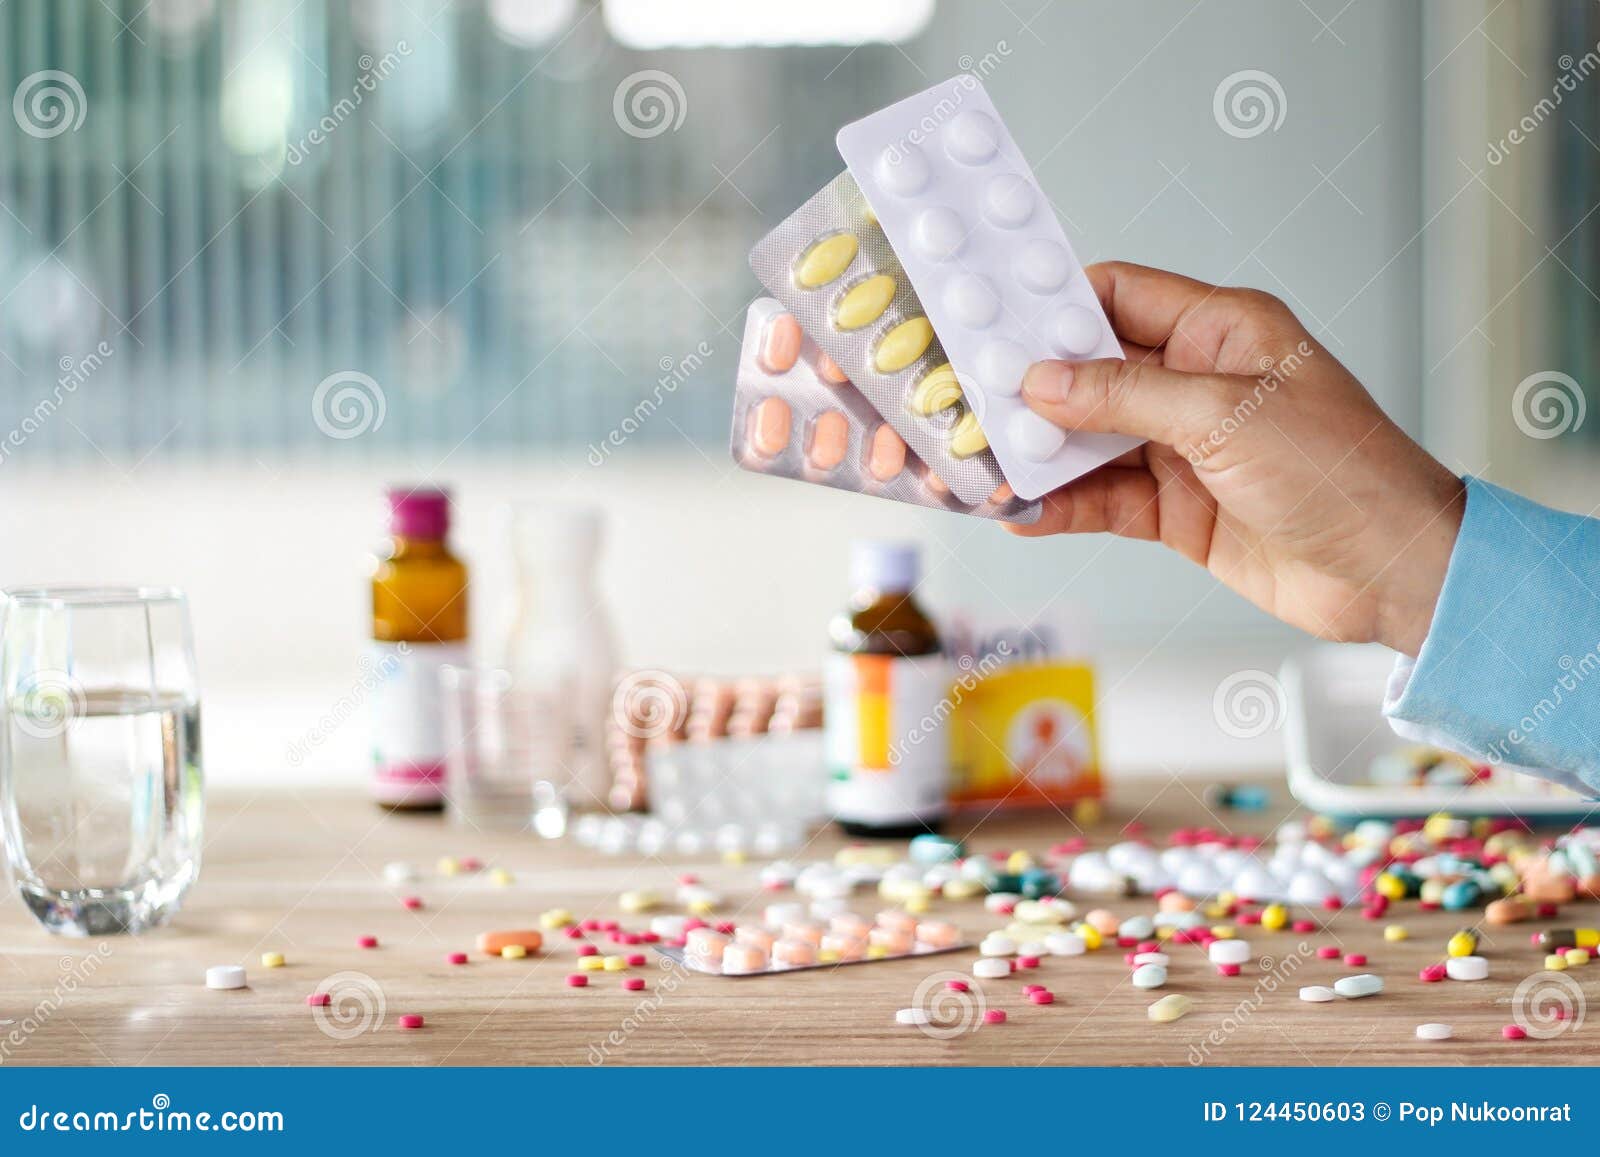 hand holding medicines pill pack with colorful drugs spread on